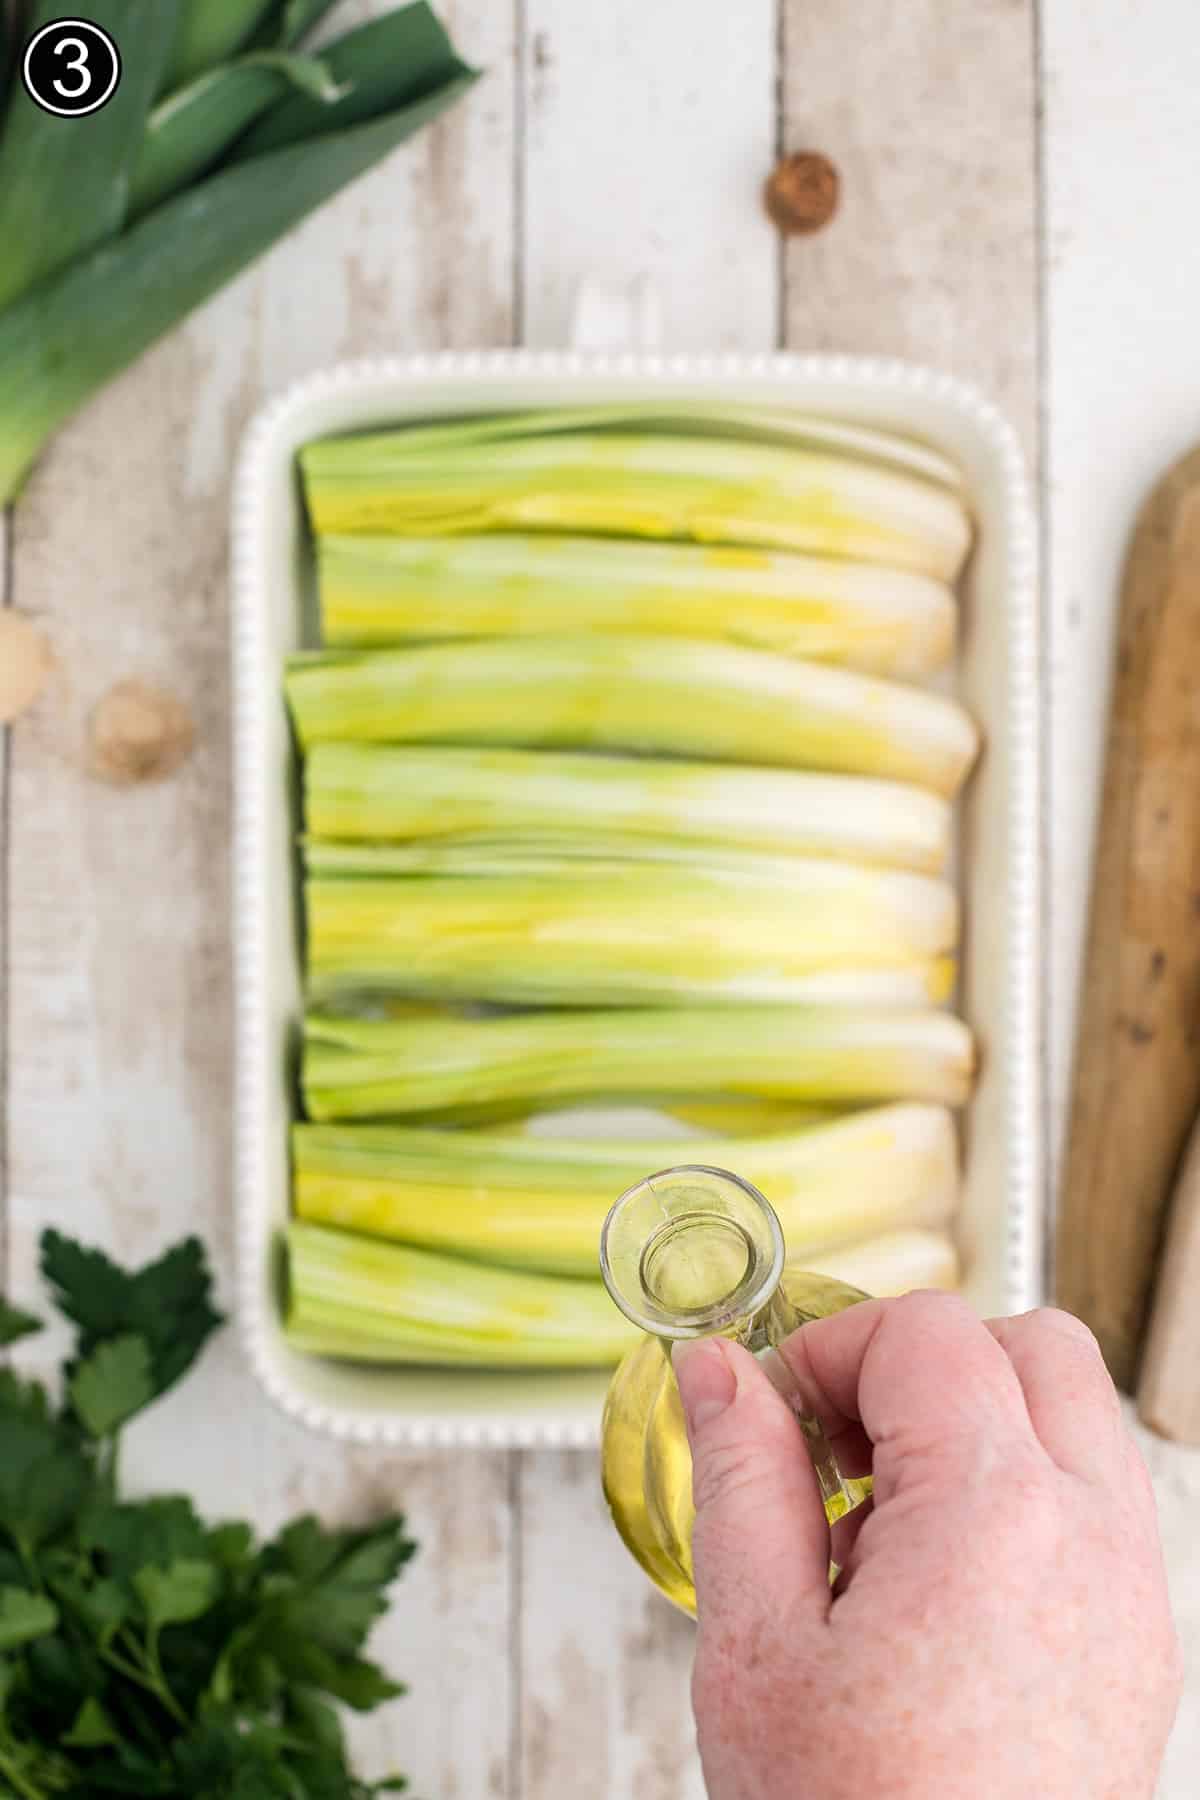 Drizzling olive oil over leeks in a baking dish.